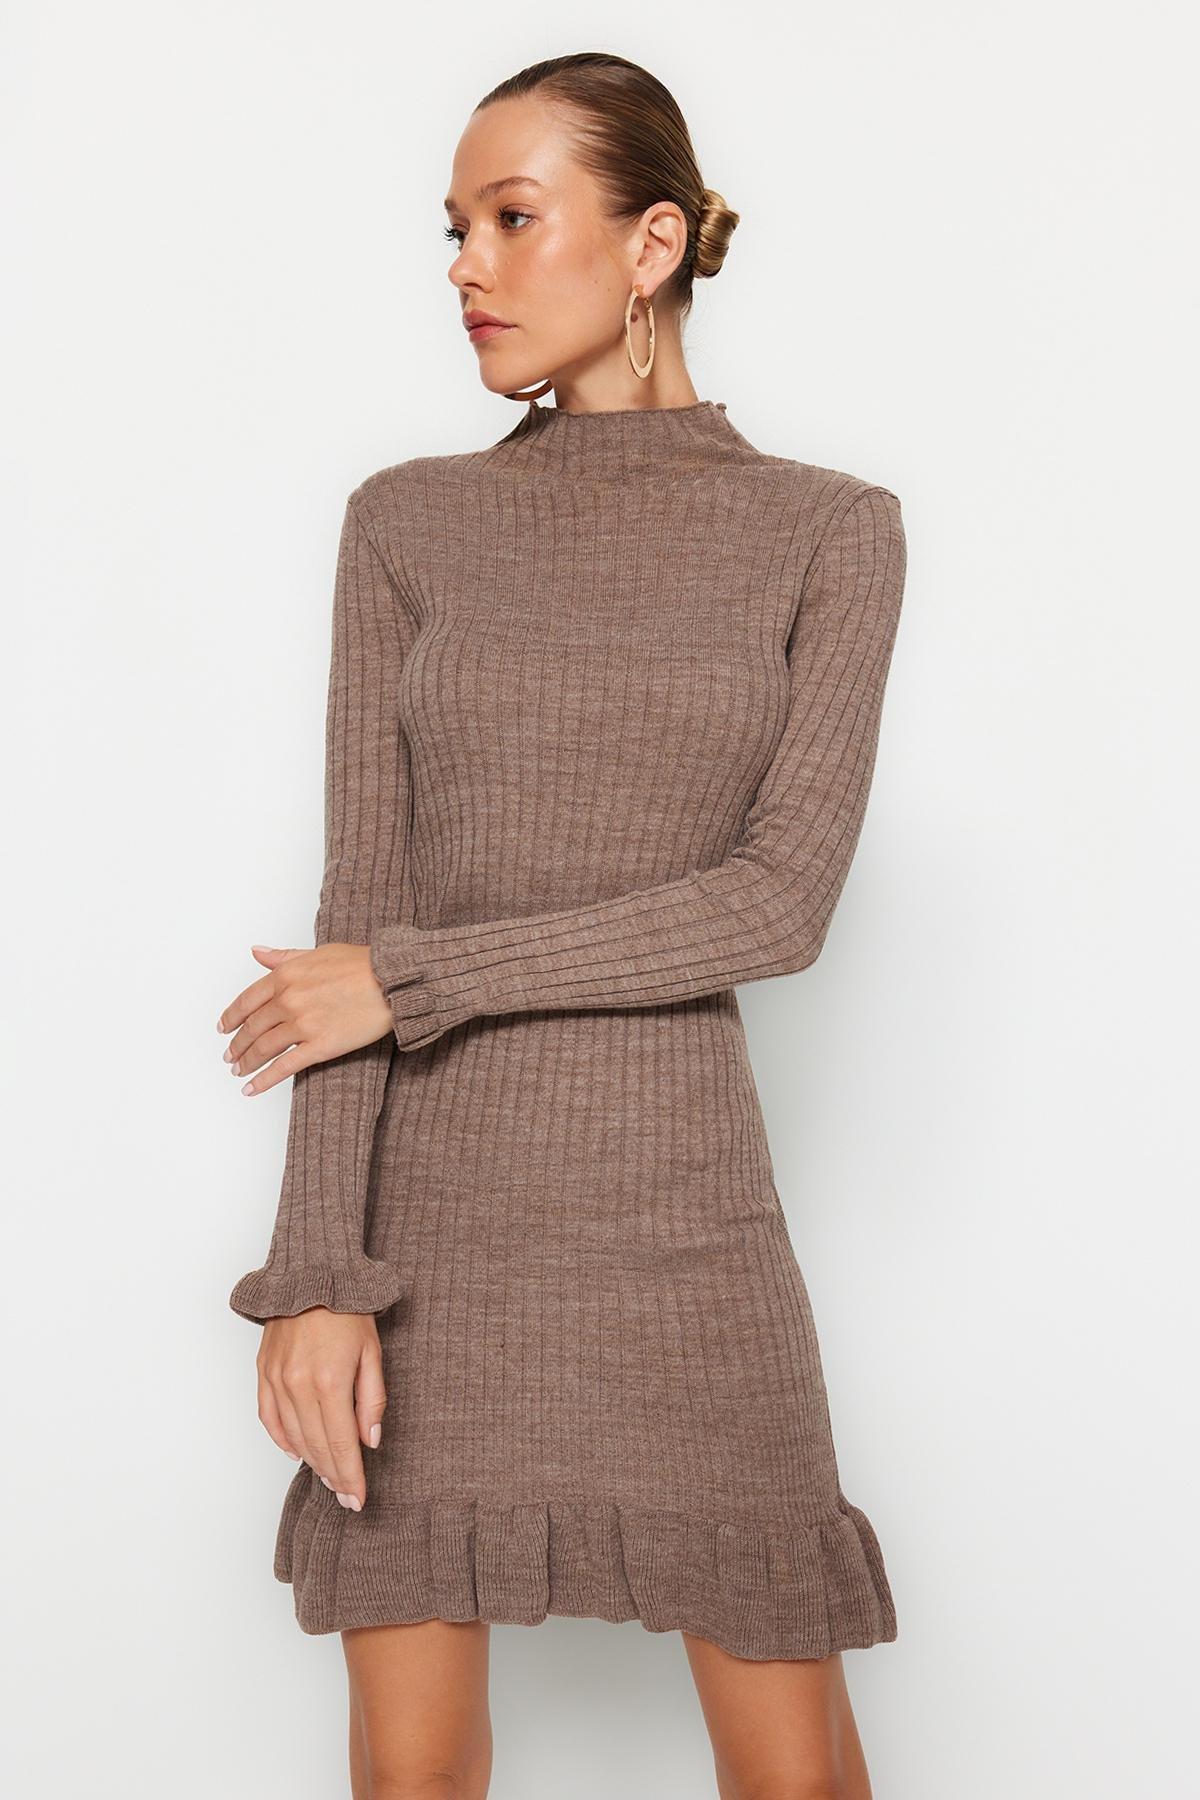 Trendyol - Brown Collared Knitted Mini Dress